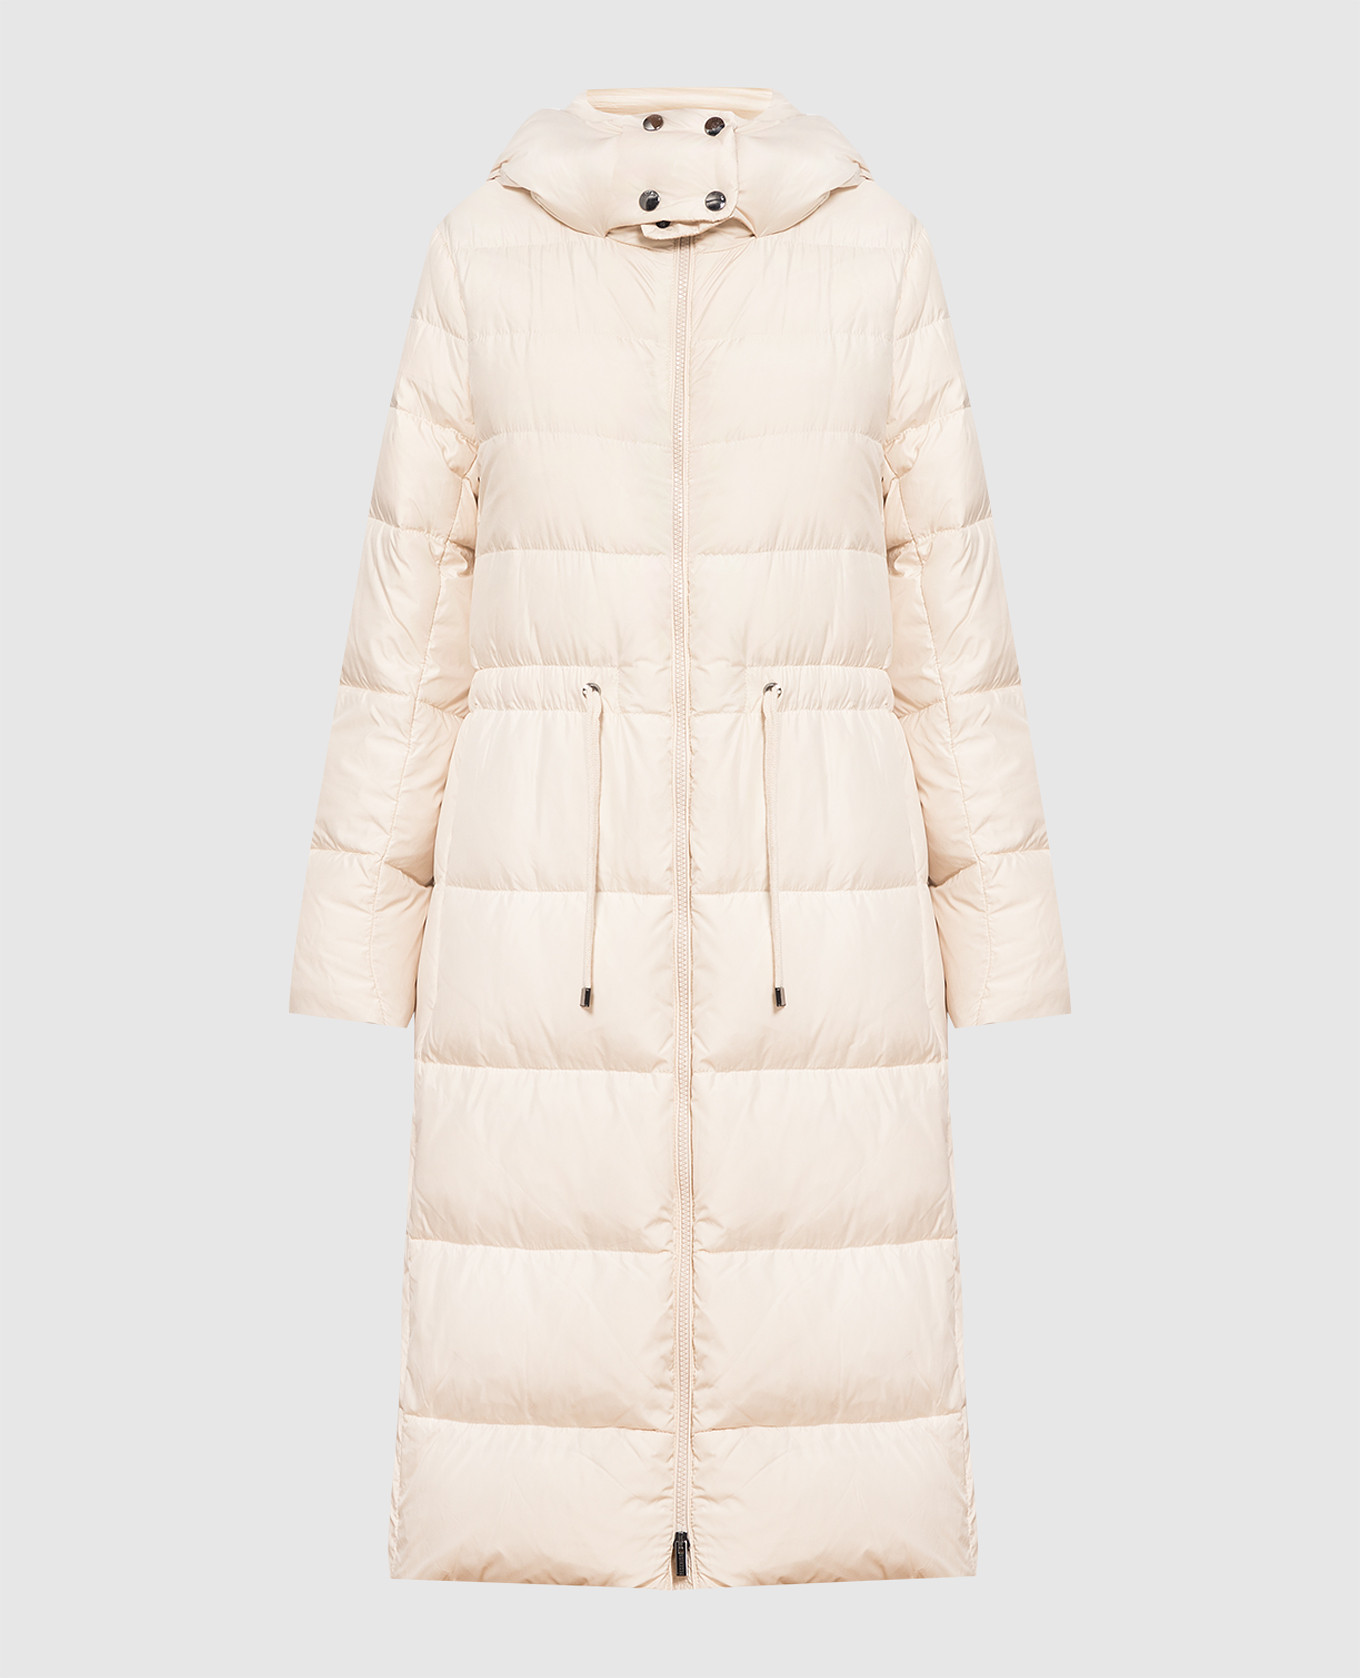 Light beige quilted down jacket